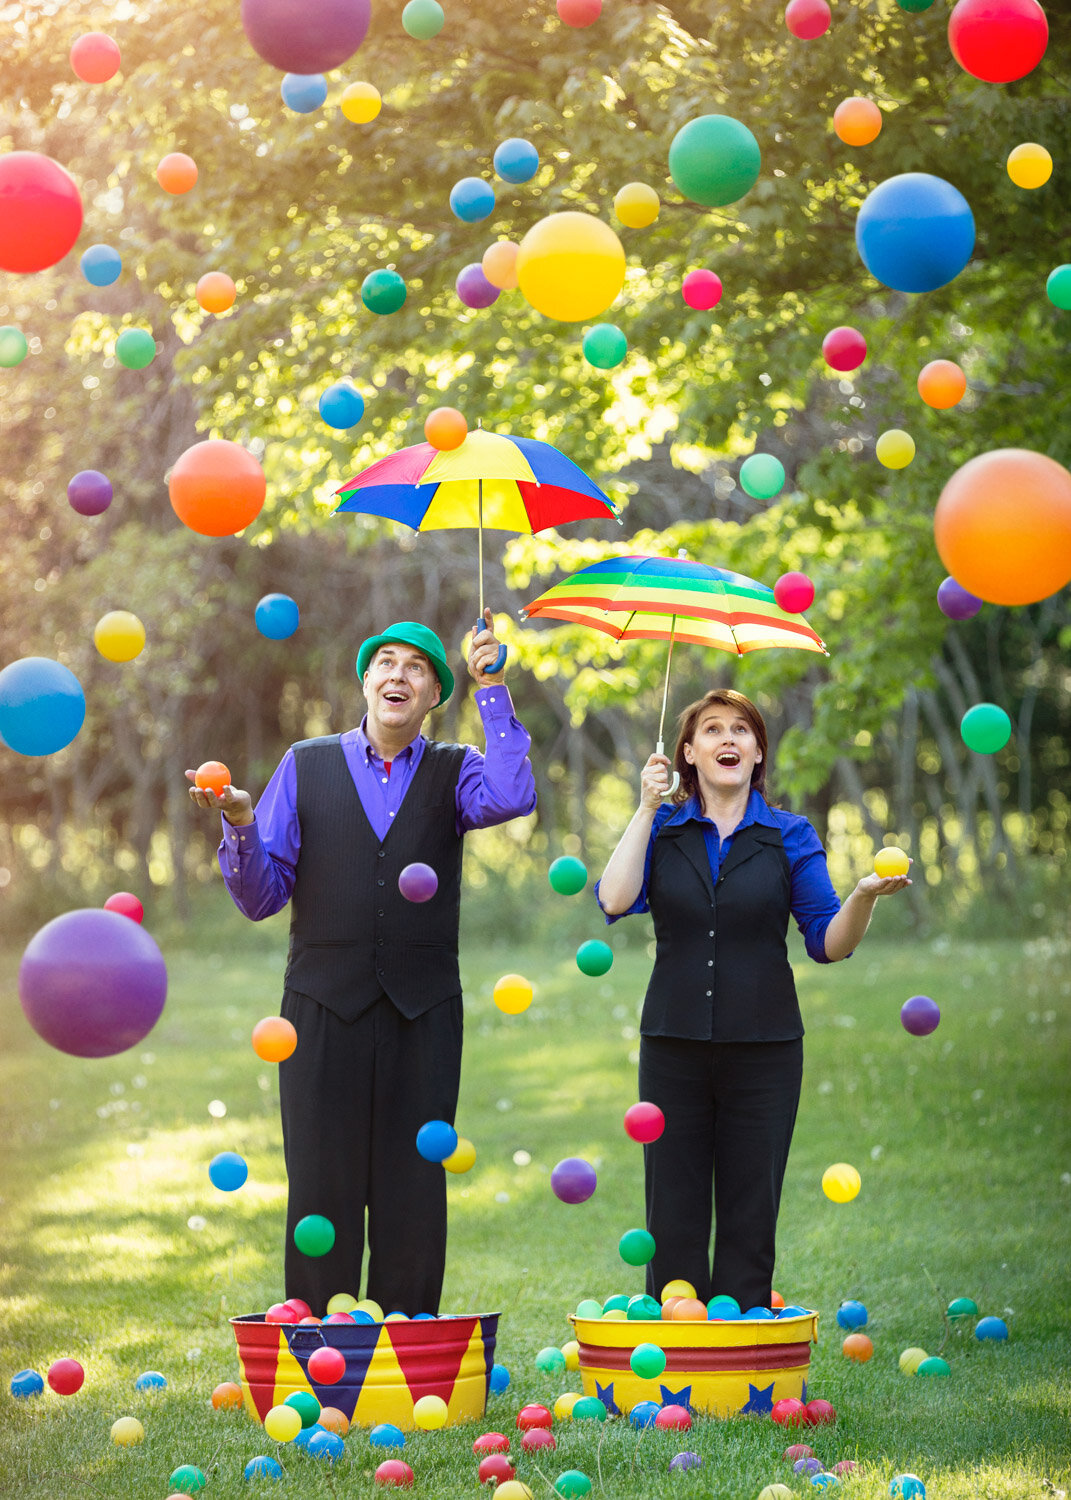 whimsical promotional photo of juggler duo standing in a kiddie pool with umbrellas and colored balls raining down by conceptual portrait photographer Hanna Agar